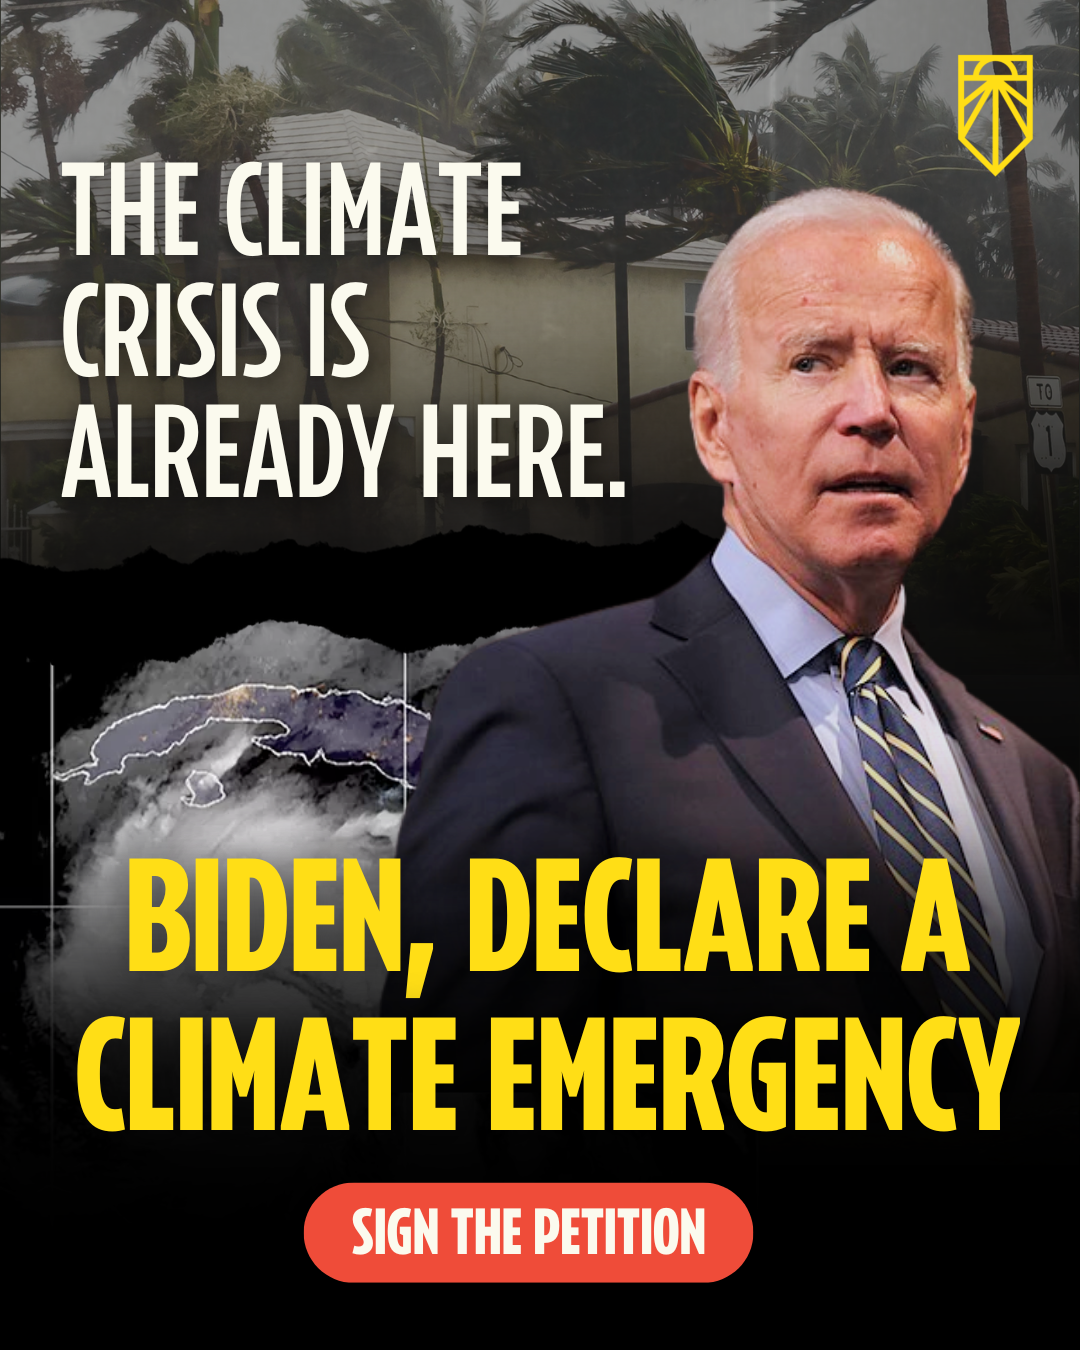 The climate crisis is already here. Biden, Declare a Climate Emergency. Sign the Petition.